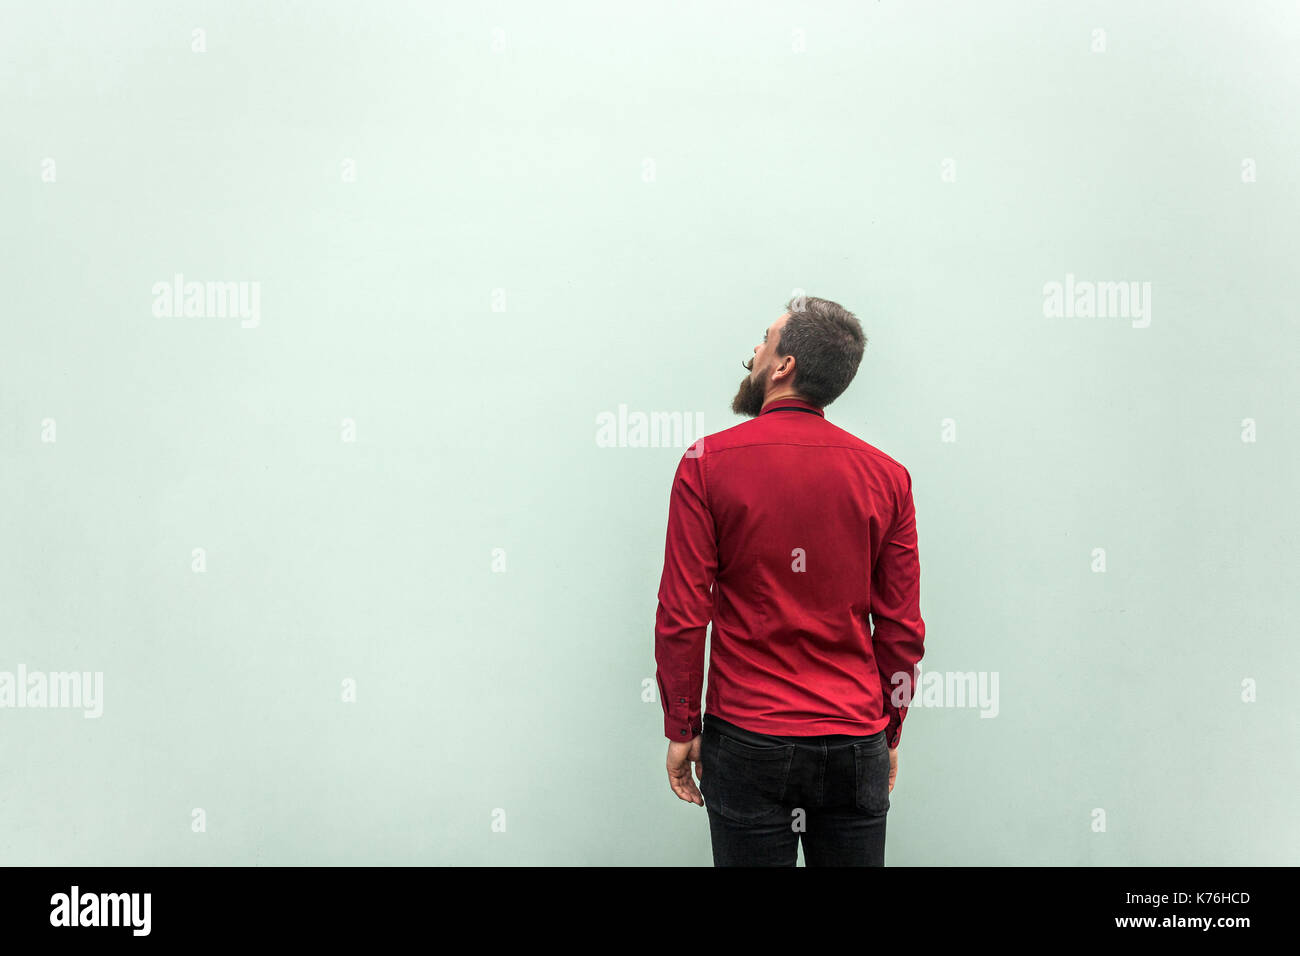 Back view of a sucess businessman, on gray background. Looking up and dreaming. Studio shot, gray background Stock Photo